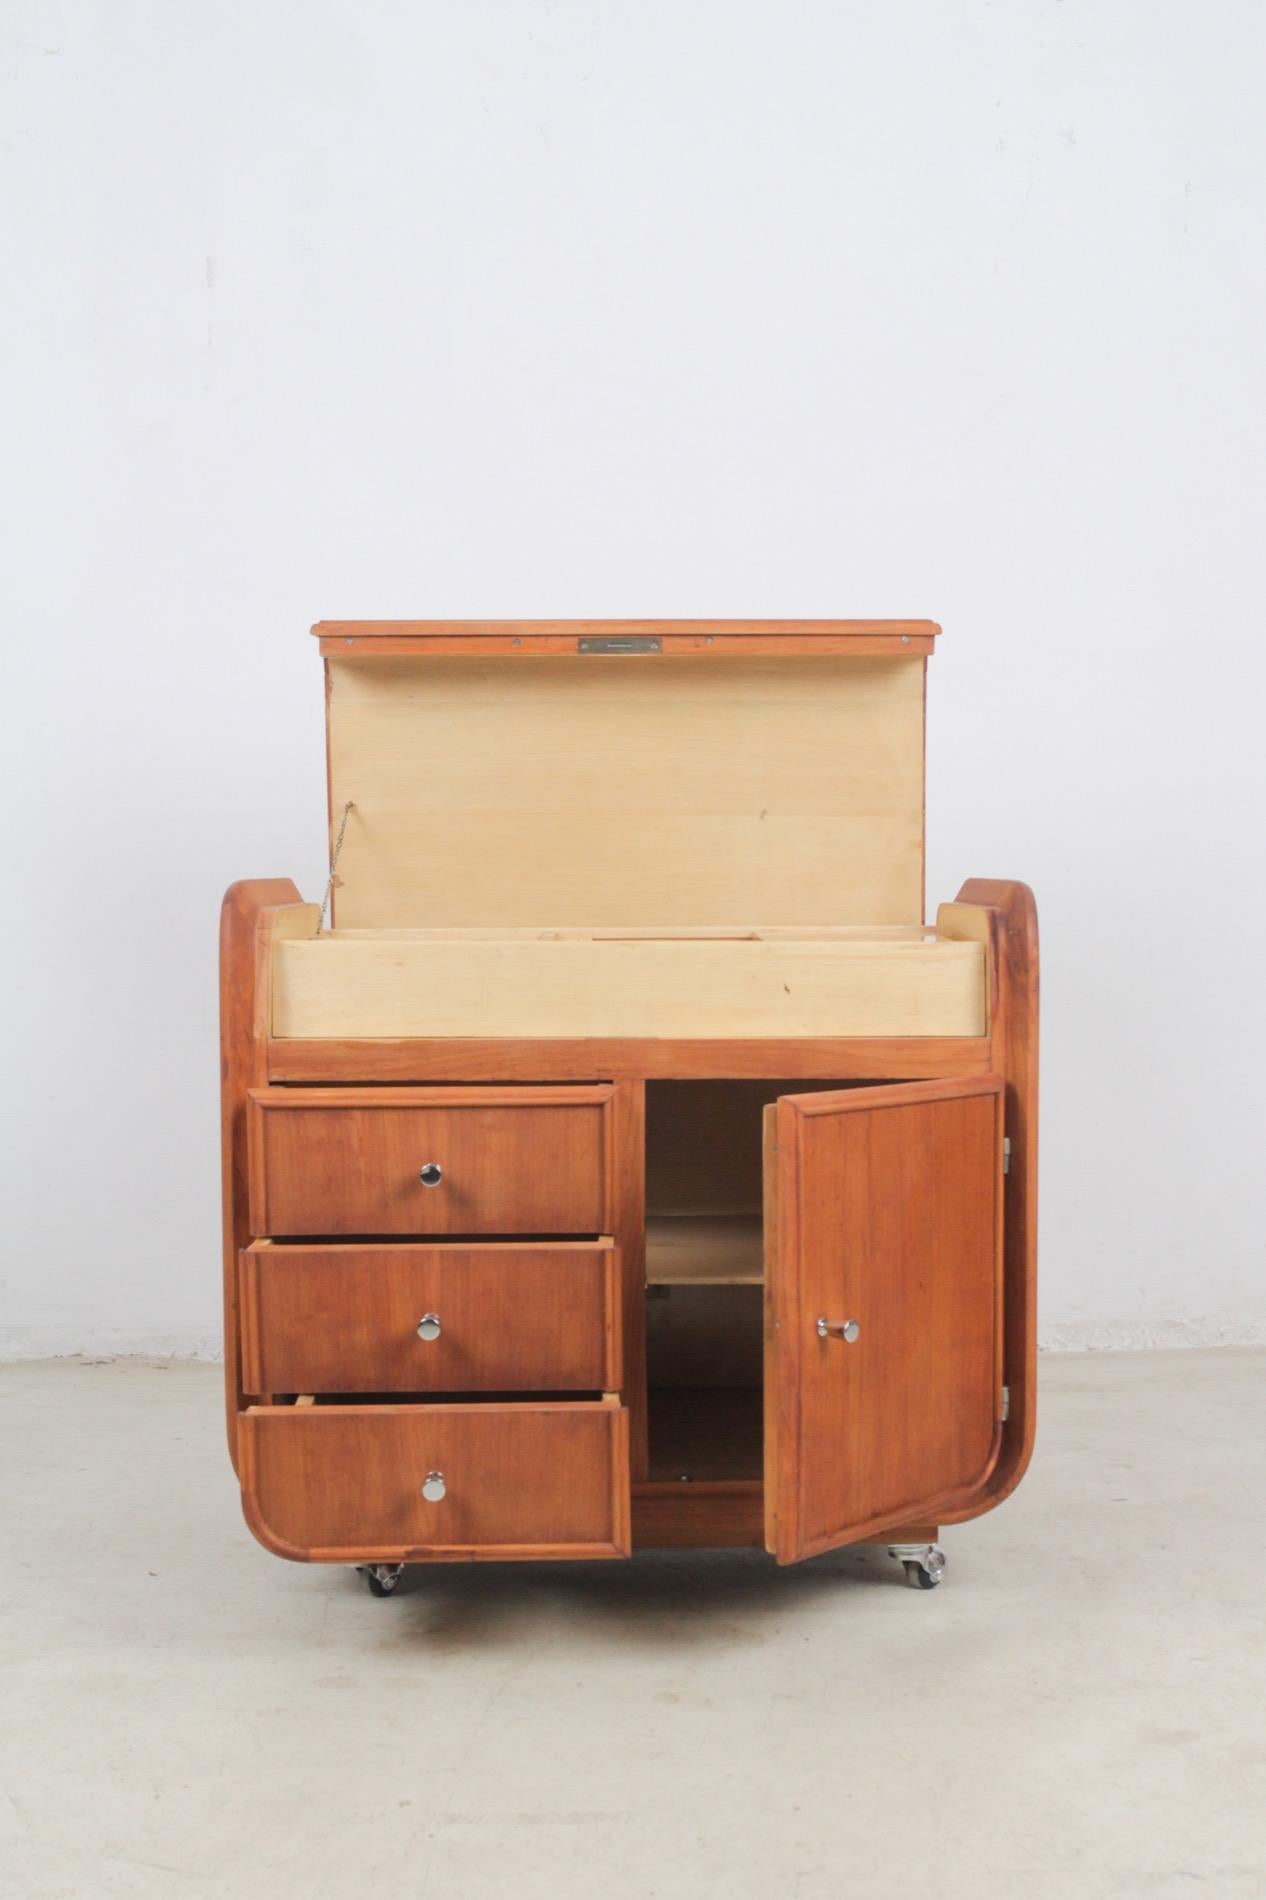 This restored Art Deco cabinet features a lot of little trays, hidden boxes, tiny drawers and shelves - this makes it perfect for storage tools for needlework, knitting, painting or a large collection of jewellery. It has got perfectly working